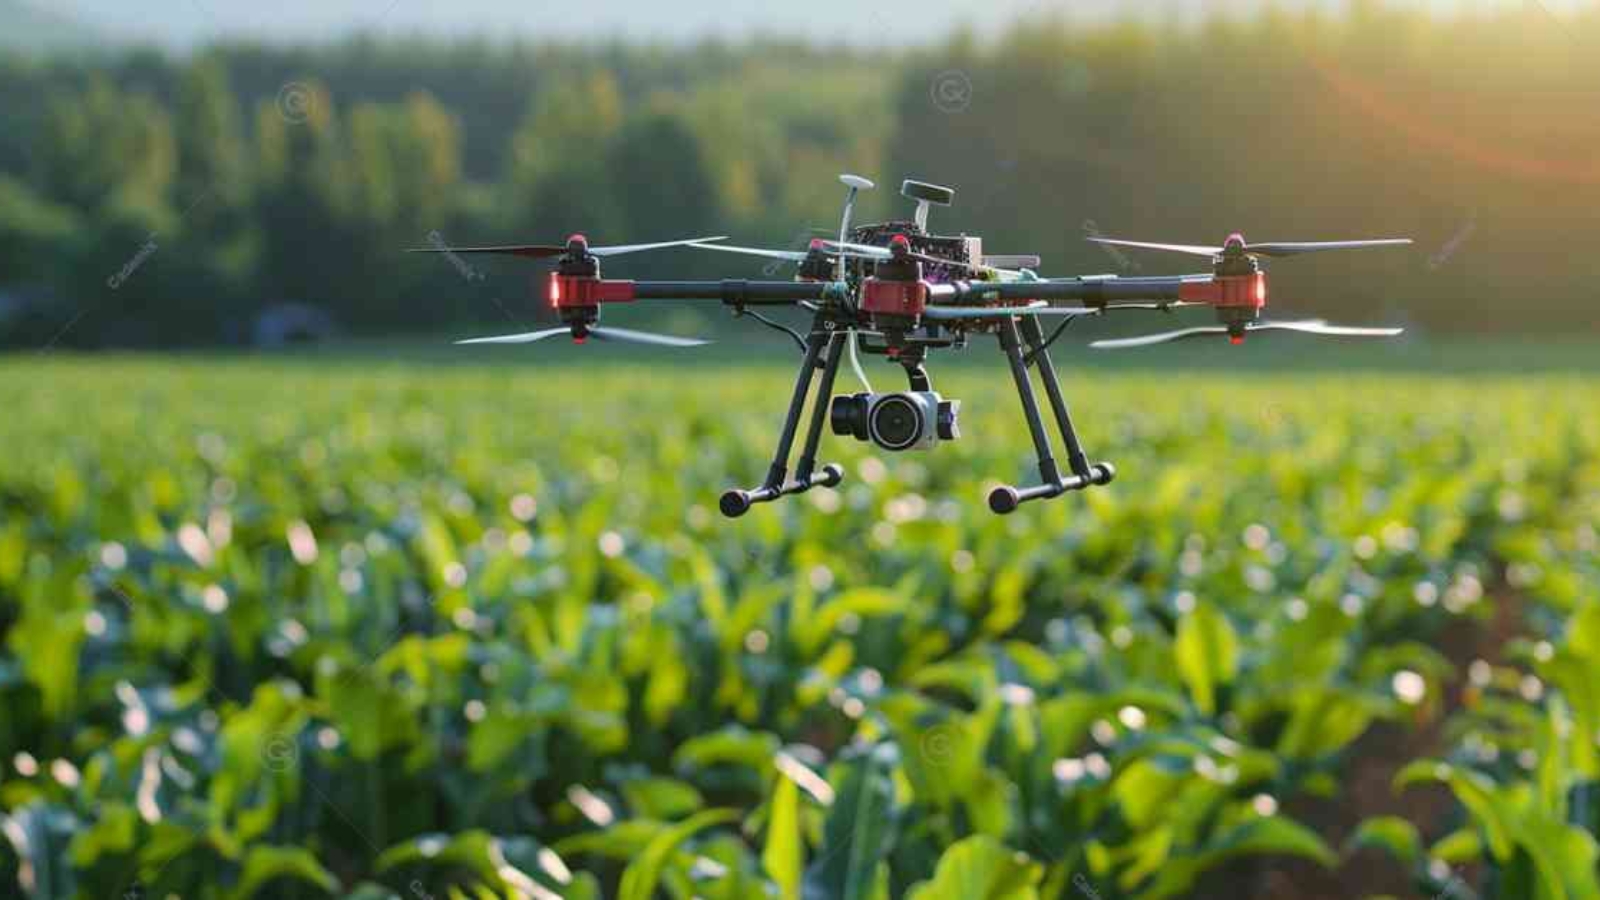 new technology in agriculture, agricultural innovation, future trends in agriculture, Hype Cycle in agriculture, agtech, smart farming, precision agriculture